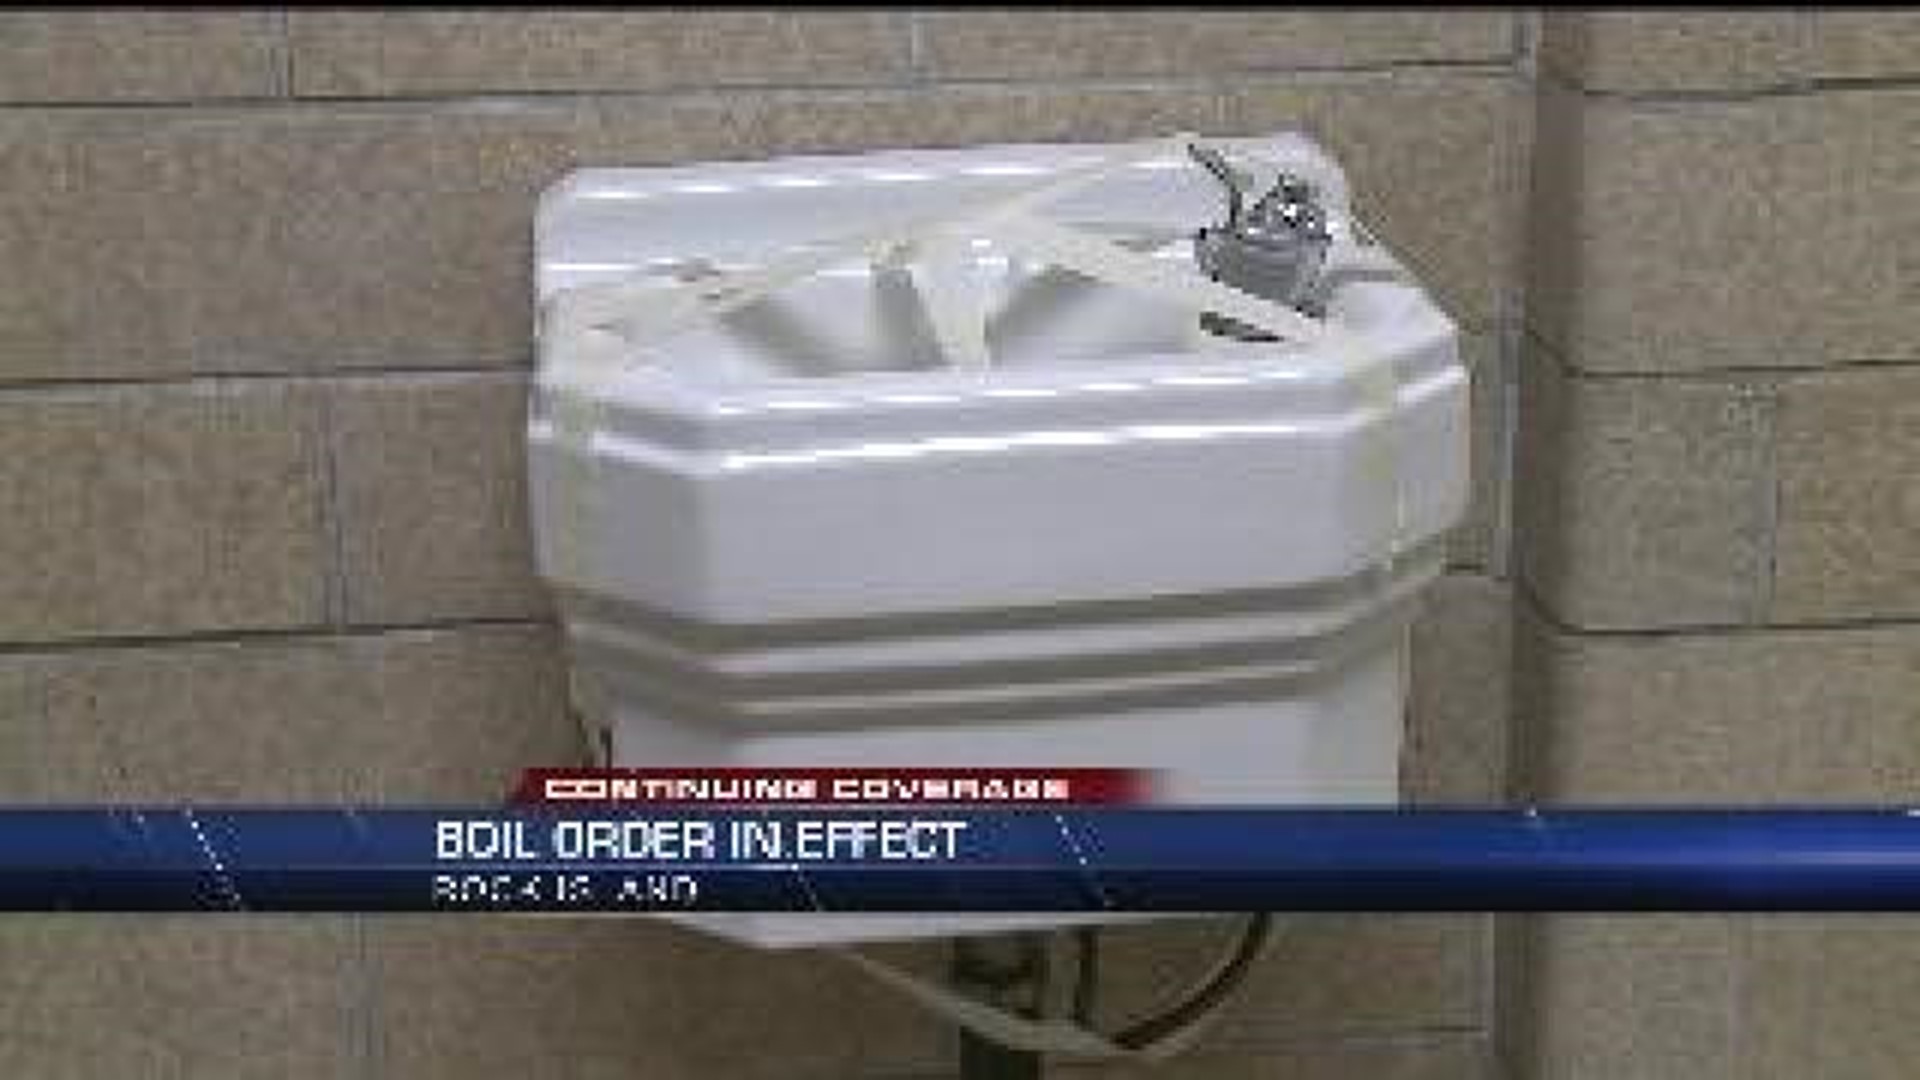 Schools Affected by Boil Order